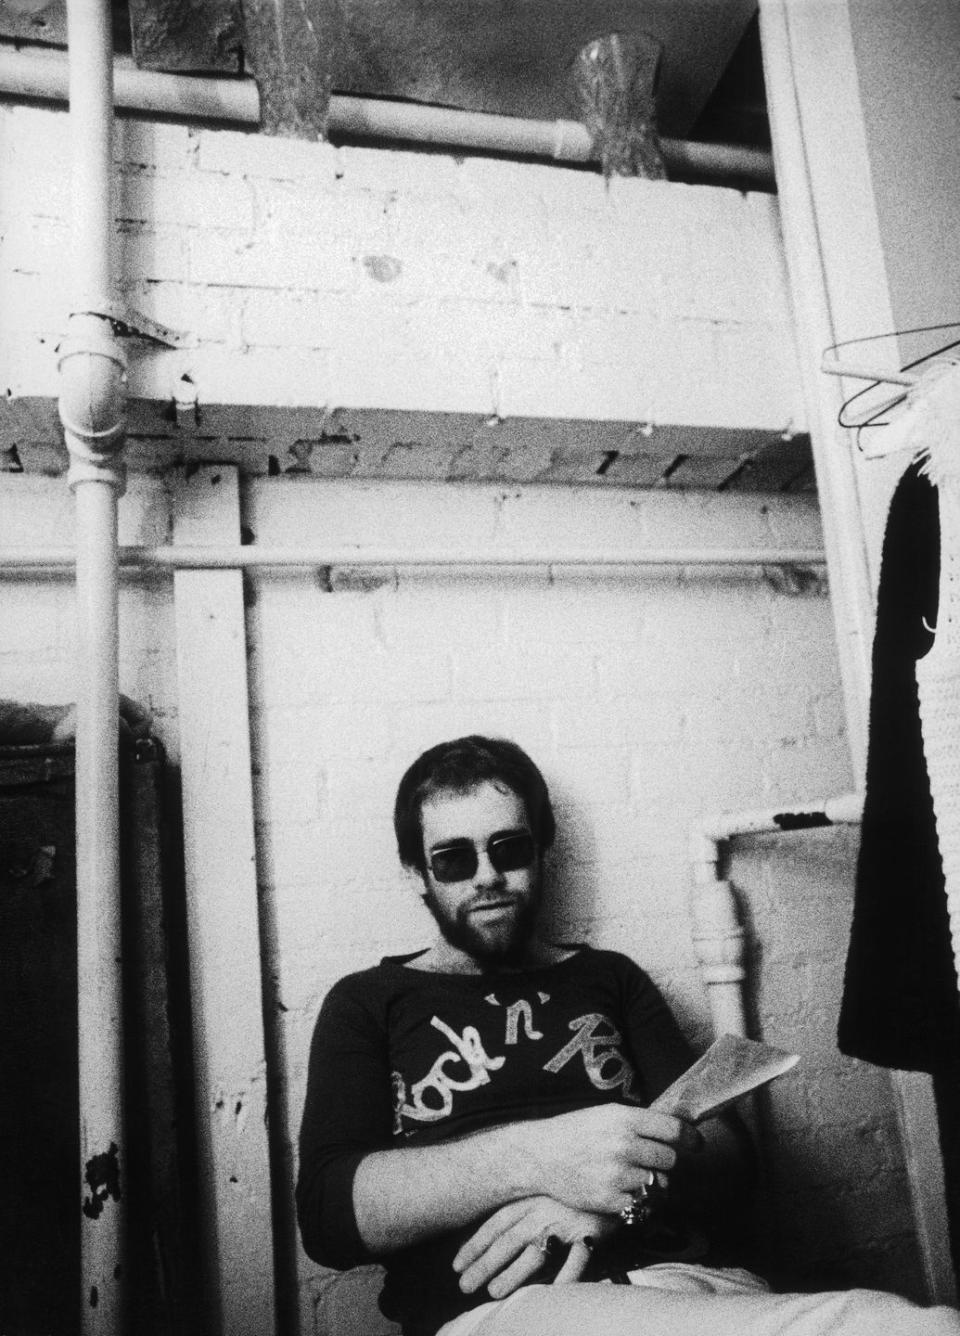 <p>Elton John relaxes backstage at Doug Weston's Troubadour on August 25, 1970 in Los Angeles (now West Hollywood), California.</p>